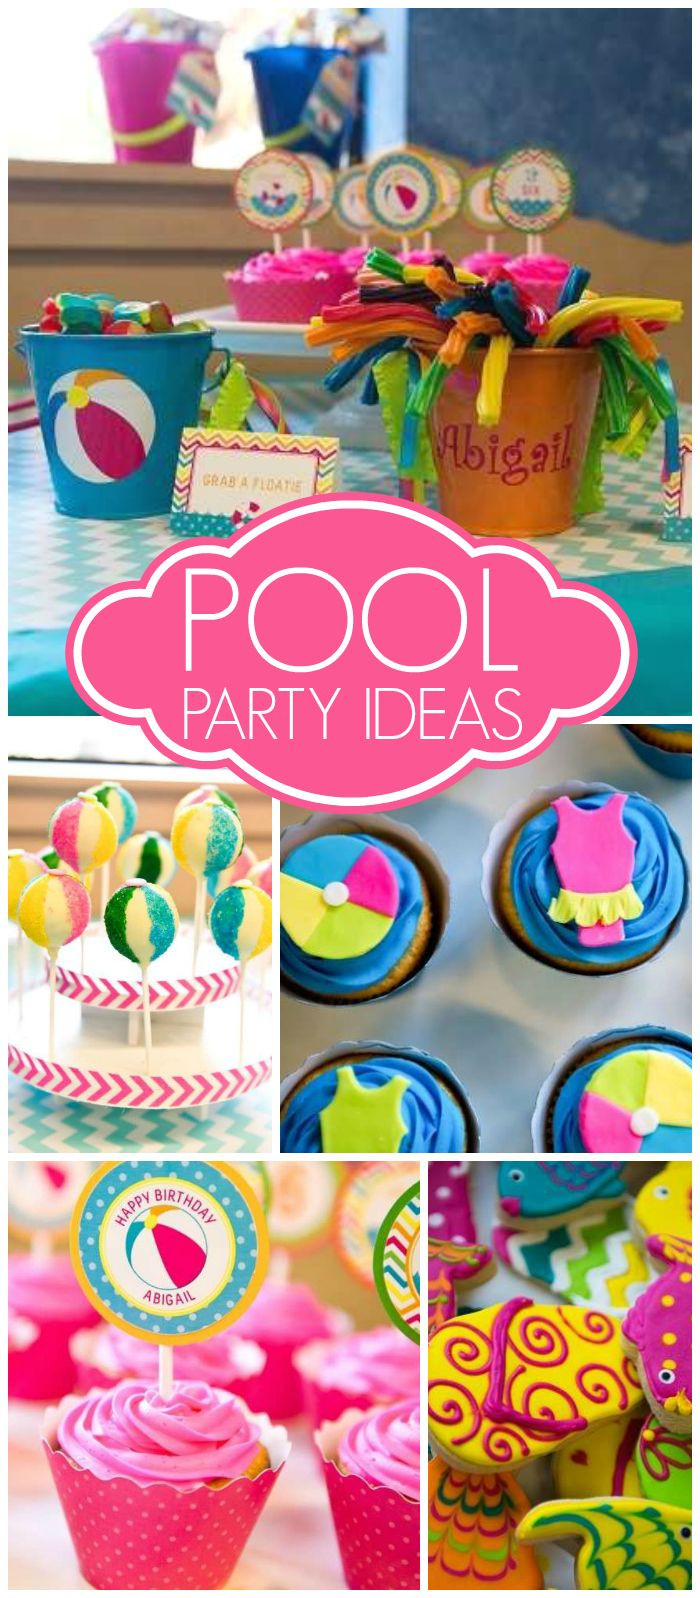 Trolls Pool Birthday Party Ideas
 Love this bright and cheery hot pink and turquoise pool